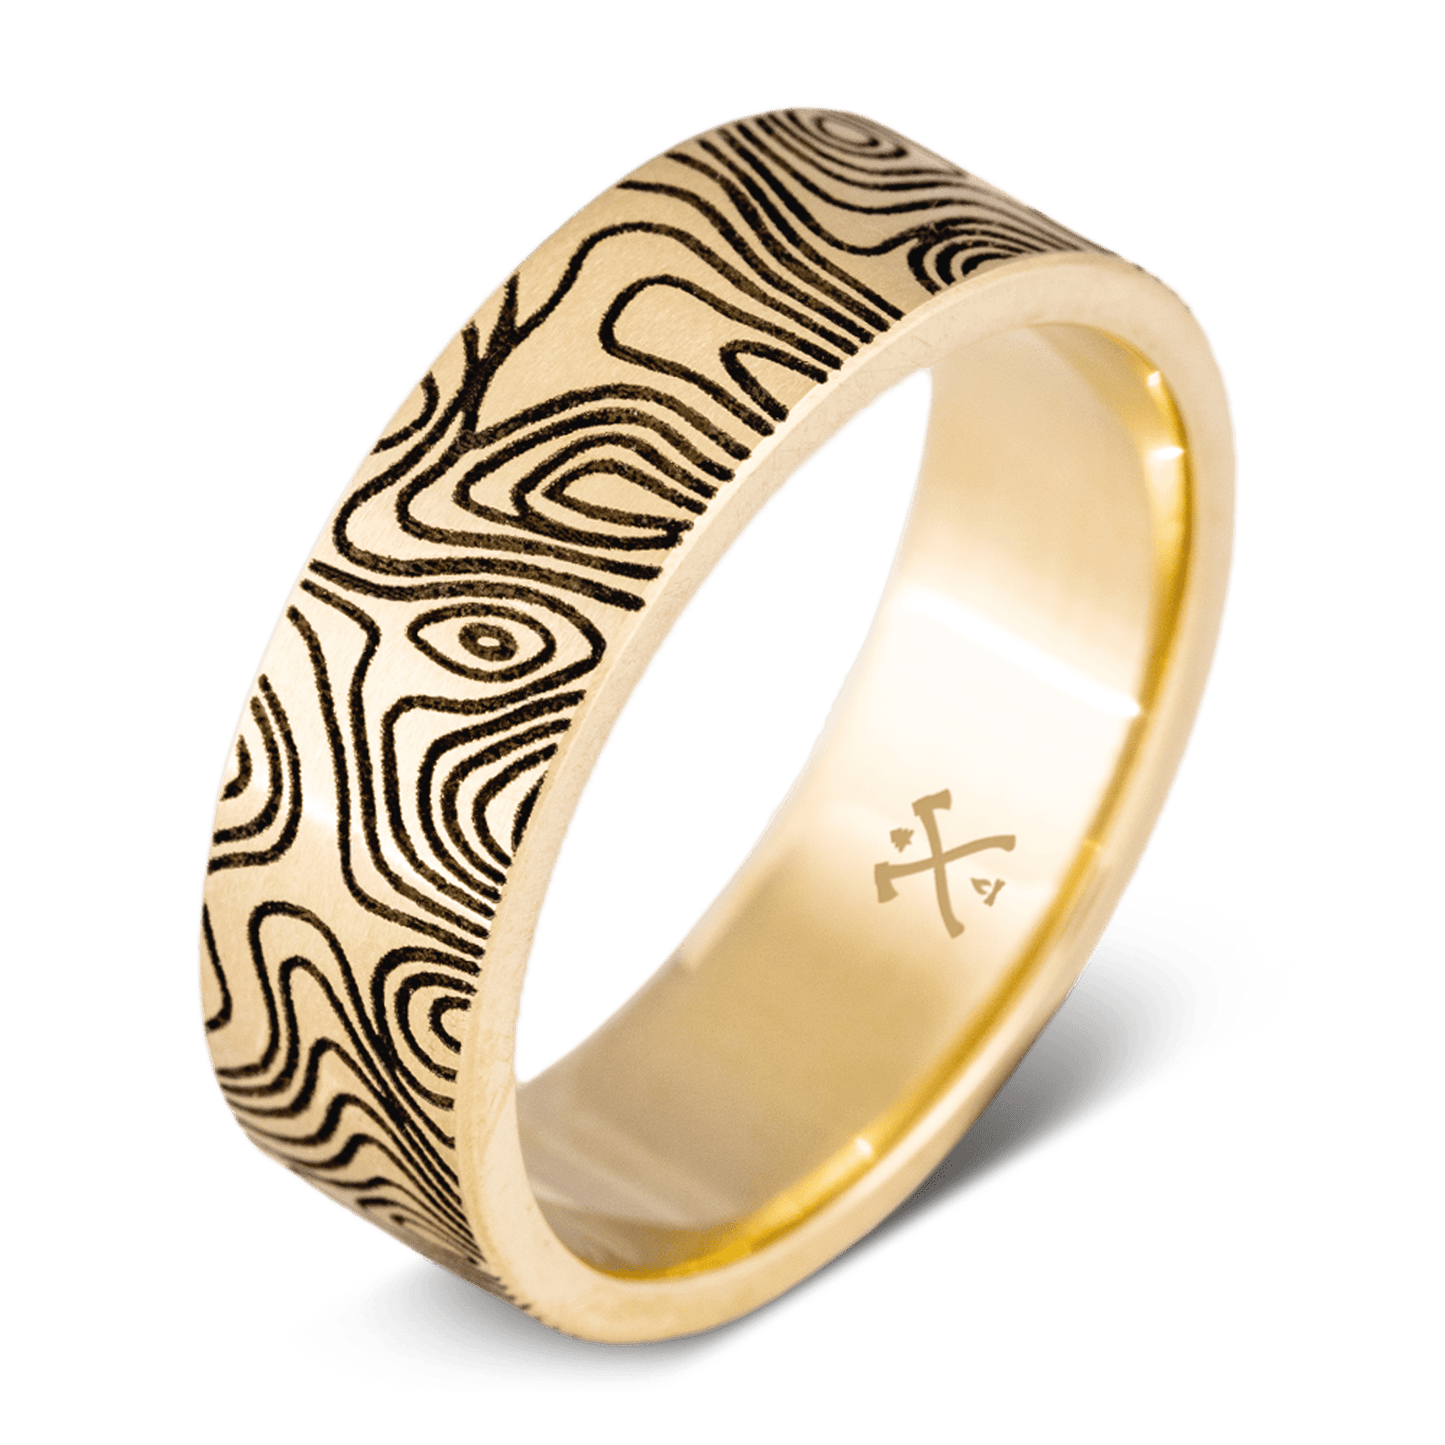 The Mercator. Mens gold wedding band made of yellow gold and engraved with topographical map